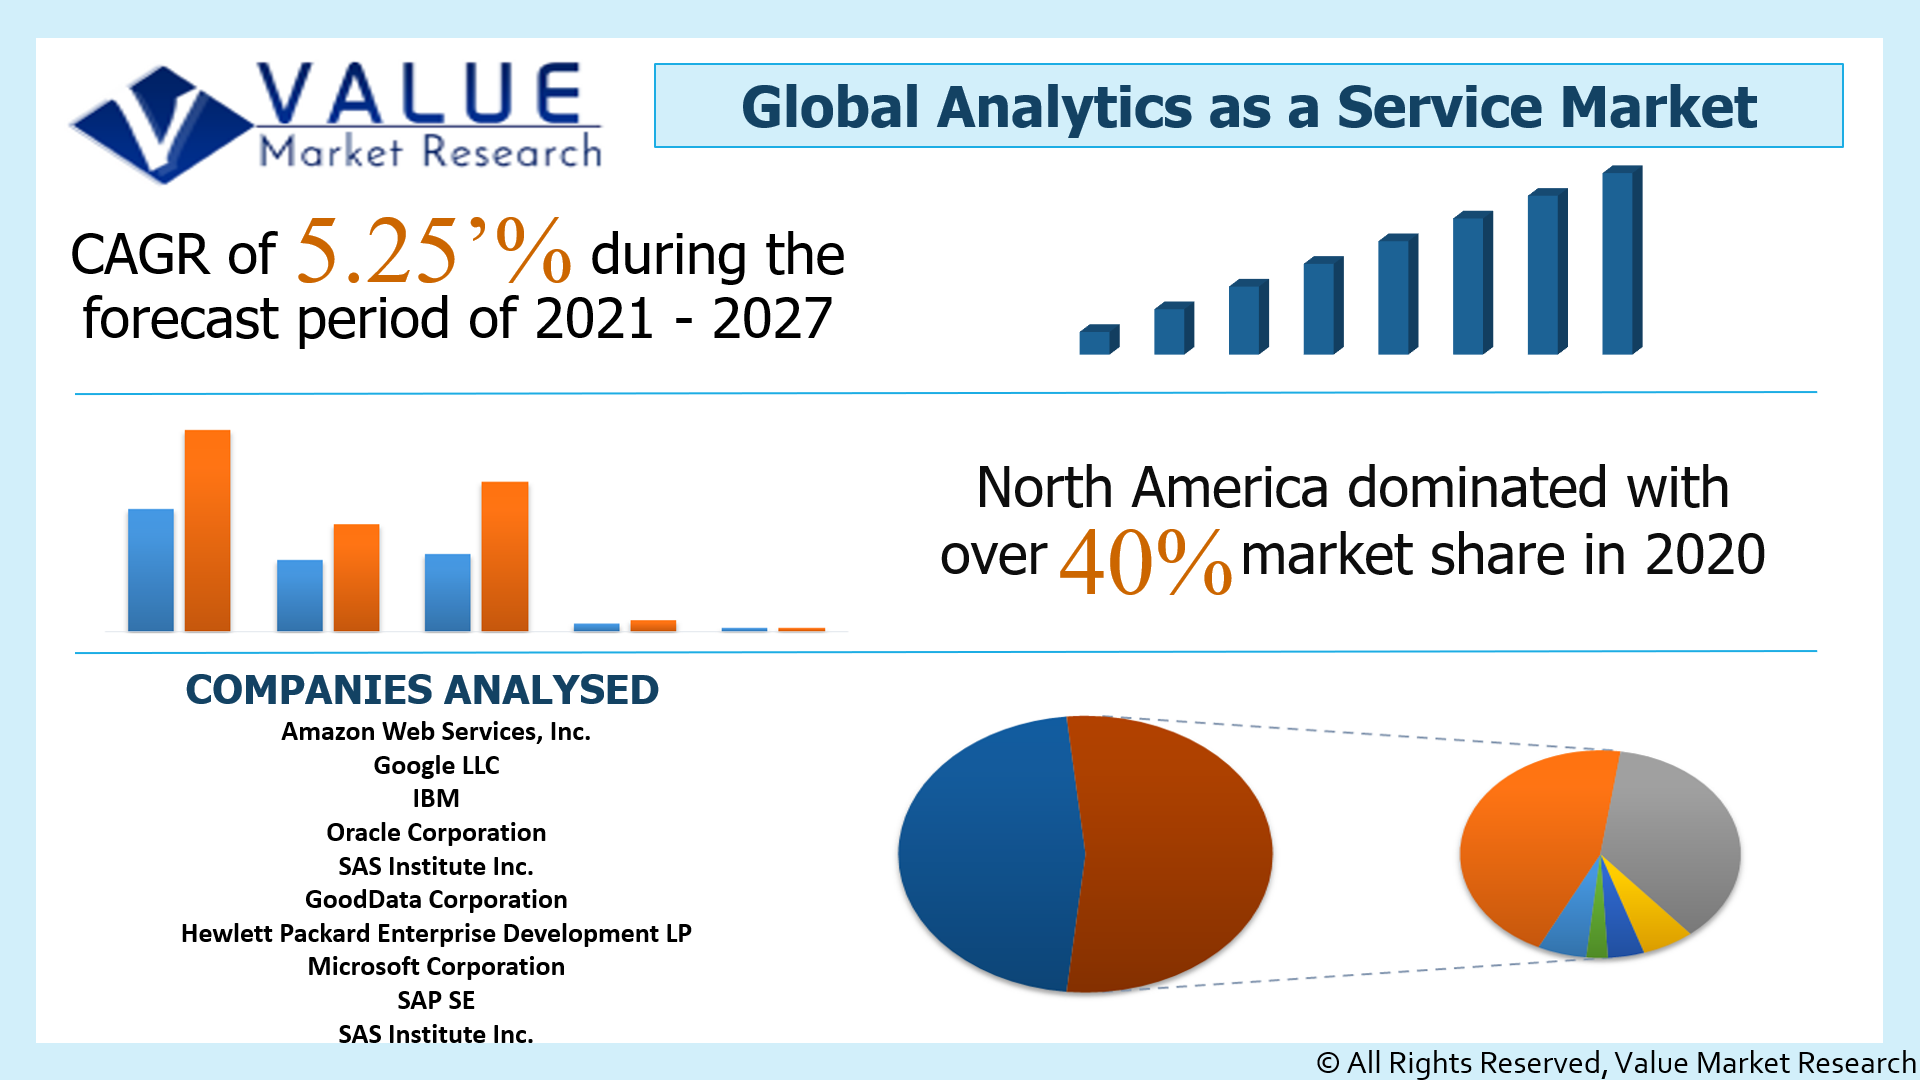 Global Analytics as a Service Market Share